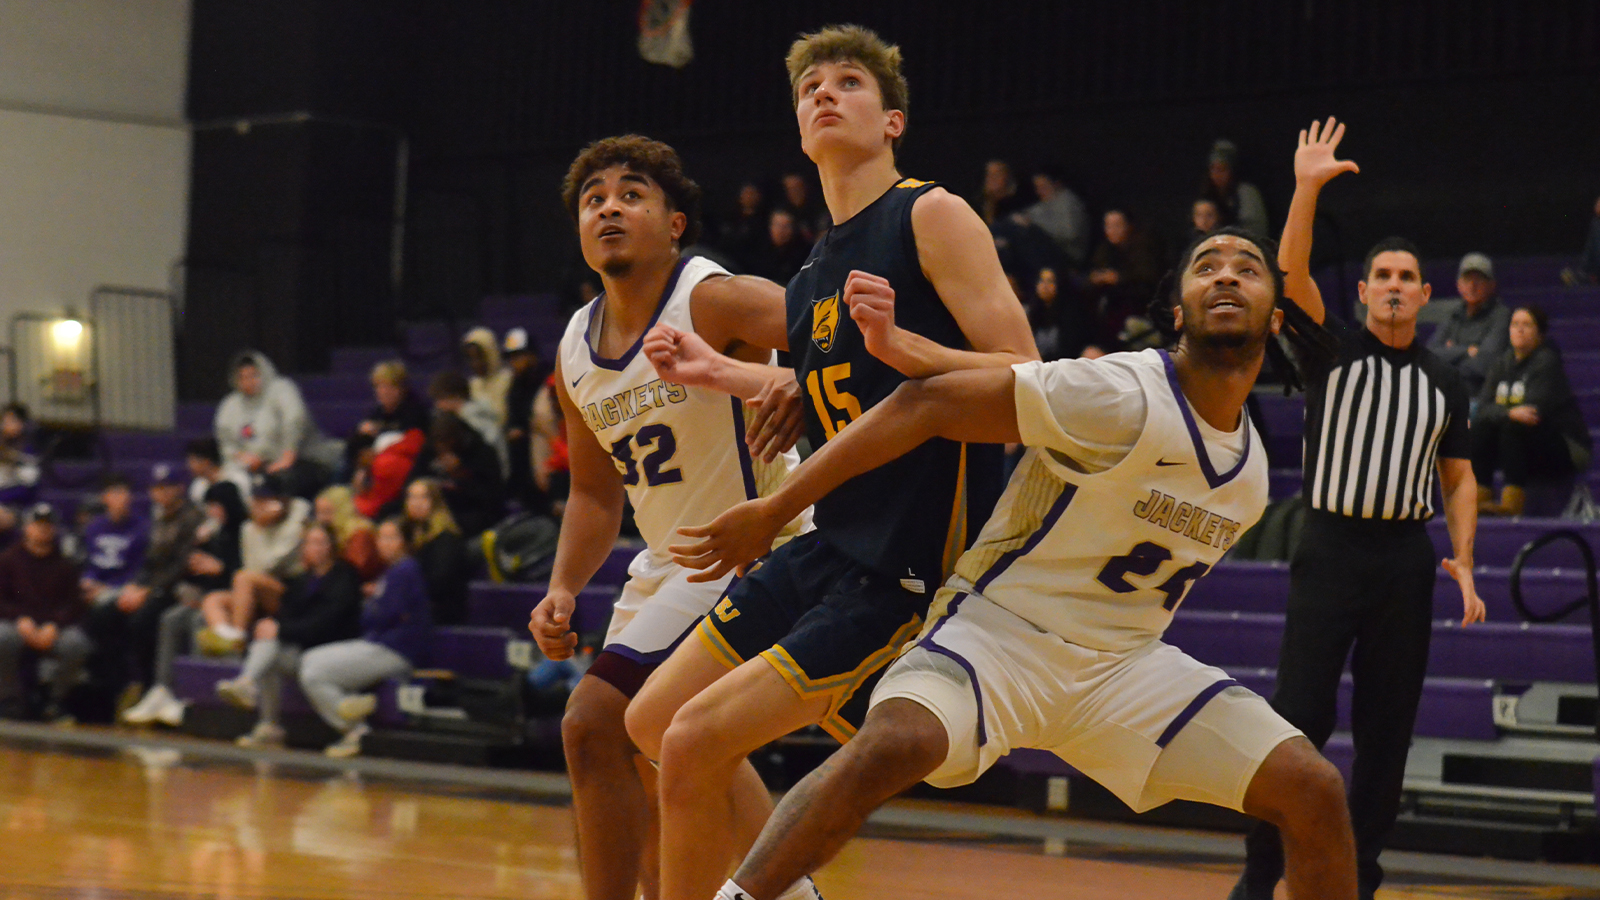 MBB Preview: Defiance seeks second straight win on Saturday